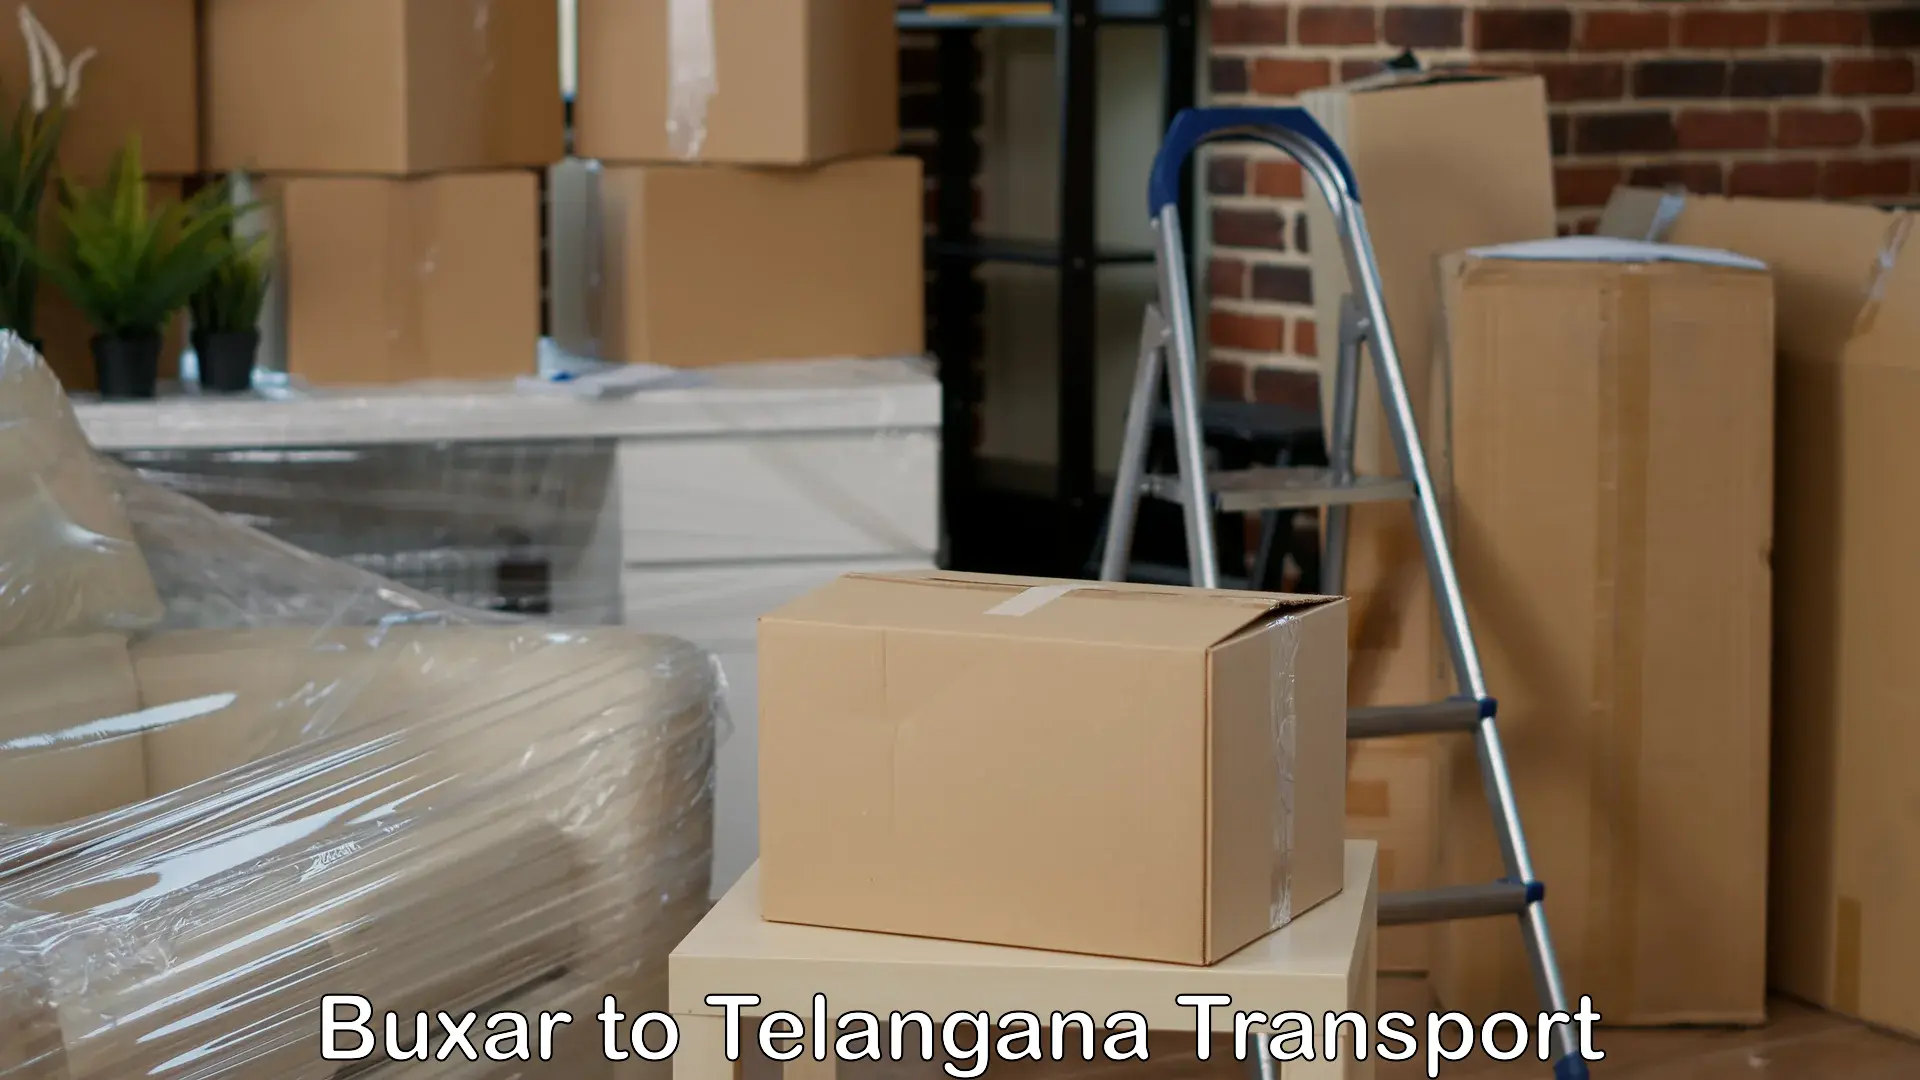 Vehicle transport services in Buxar to Pregnapur